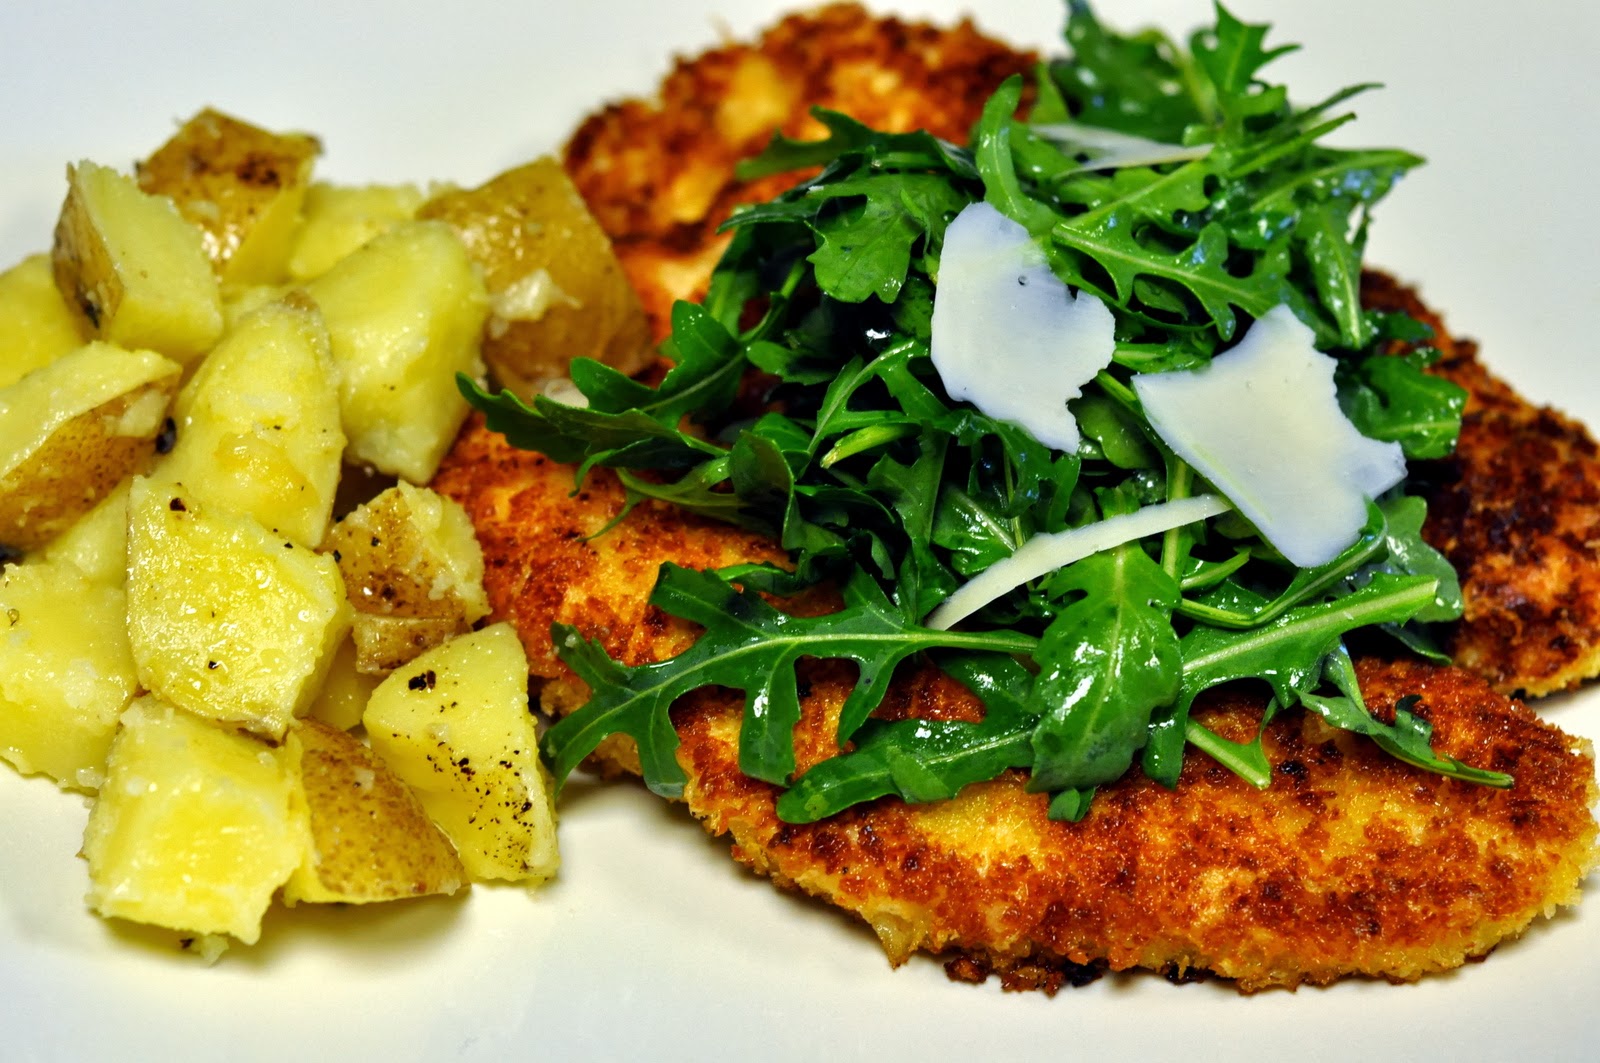 Panko-Crusted Turkey Cutlets with Arugula and Parmesan | Taste As You Go